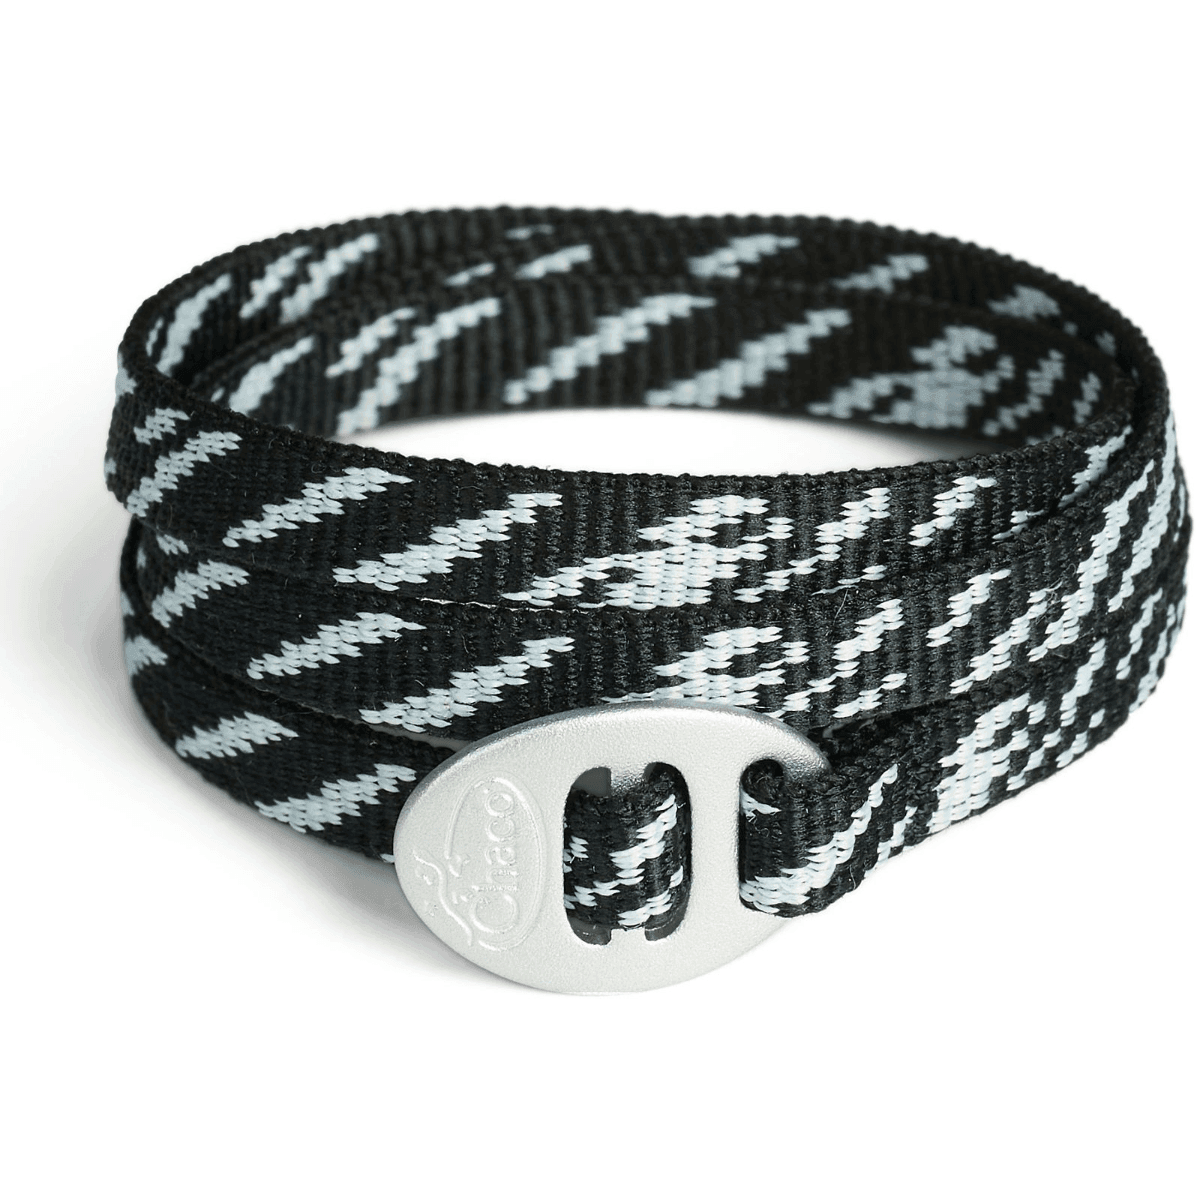 Wrist Wrap - The Shoe Collective